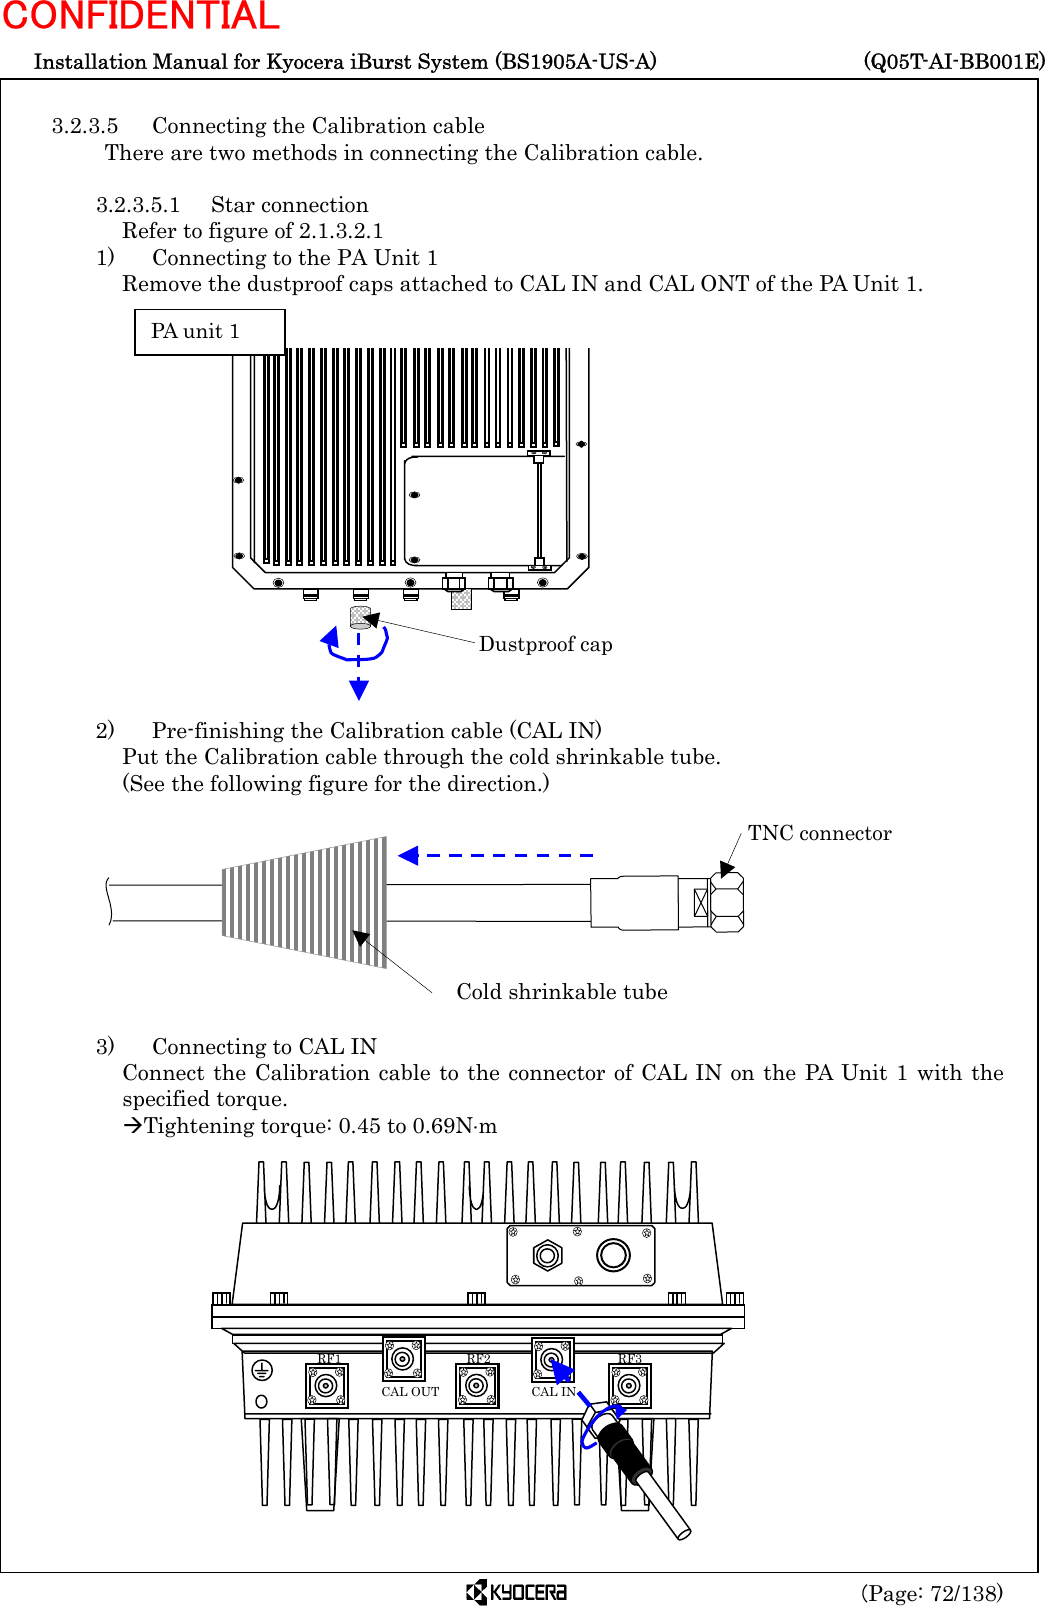  Installation Manual for Kyocera iBurst System (BS1905A-US-A)     (Q05T-AI-BB001E) (Page: 72/138) CONFIDENTIAL  3.2.3.5  Connecting the Calibration cable There are two methods in connecting the Calibration cable.  3.2.3.5.1 Star connection Refer to figure of 2.1.3.2.1 1)    Connecting to the PA Unit 1 Remove the dustproof caps attached to CAL IN and CAL ONT of the PA Unit 1.                 2)    Pre-finishing the Calibration cable (CAL IN) Put the Calibration cable through the cold shrinkable tube.   (See the following figure for the direction.)          3)    Connecting to CAL IN Connect the Calibration cable to the connector of CAL IN on the PA Unit 1 with the specified torque. ÆTightening torque: 0.45 to 0.69N⋅m                 Cold shrinkable tube TNC connector  RF3 RF2 RF1 CAL OUT  CAL IN Dustproof cap PA unit 1 